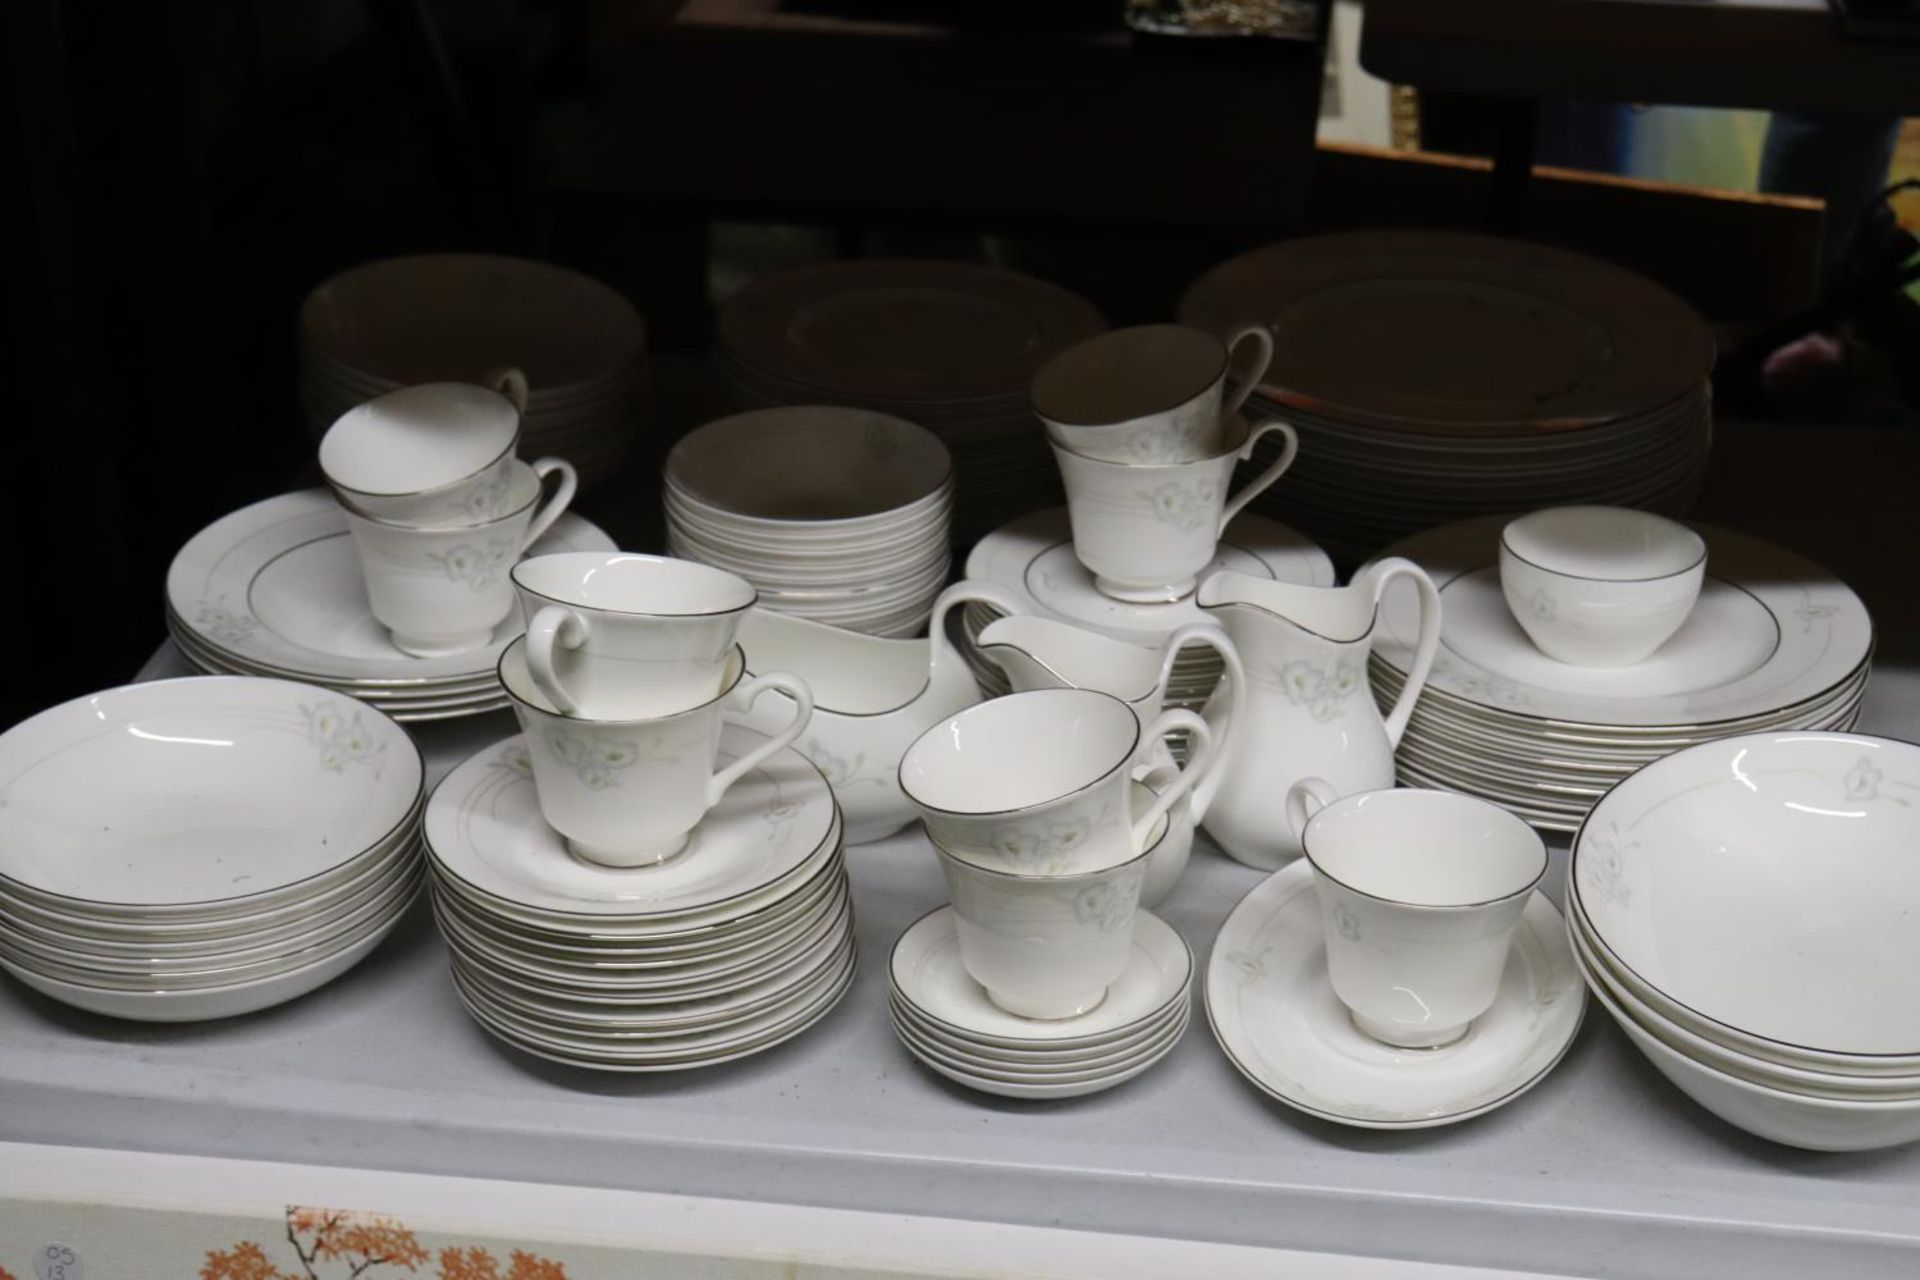 A LARGE QUANTITY OF ROYAL DOULTON "MYSTIQUE" TO INCLUDE DINNER PATES, SAUCE BOAT, SERVING BOWLS,